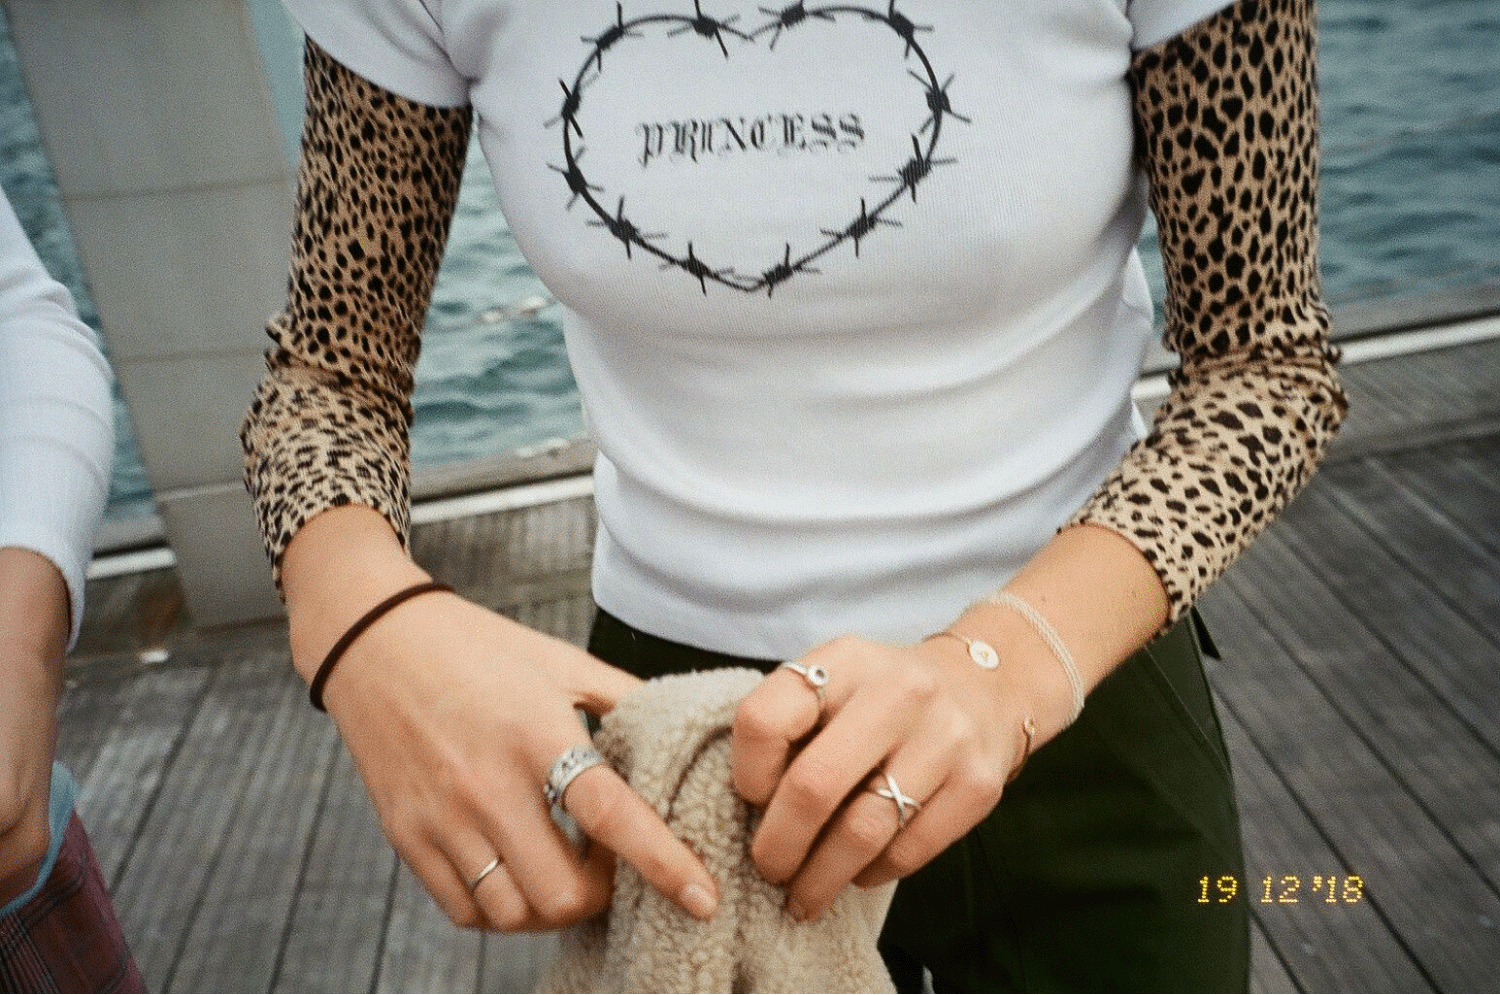 A close-up of Aubrey's outfit, a baby tee that says Princess with a leopard print turtleneck underneath. Shot on 35mm film.